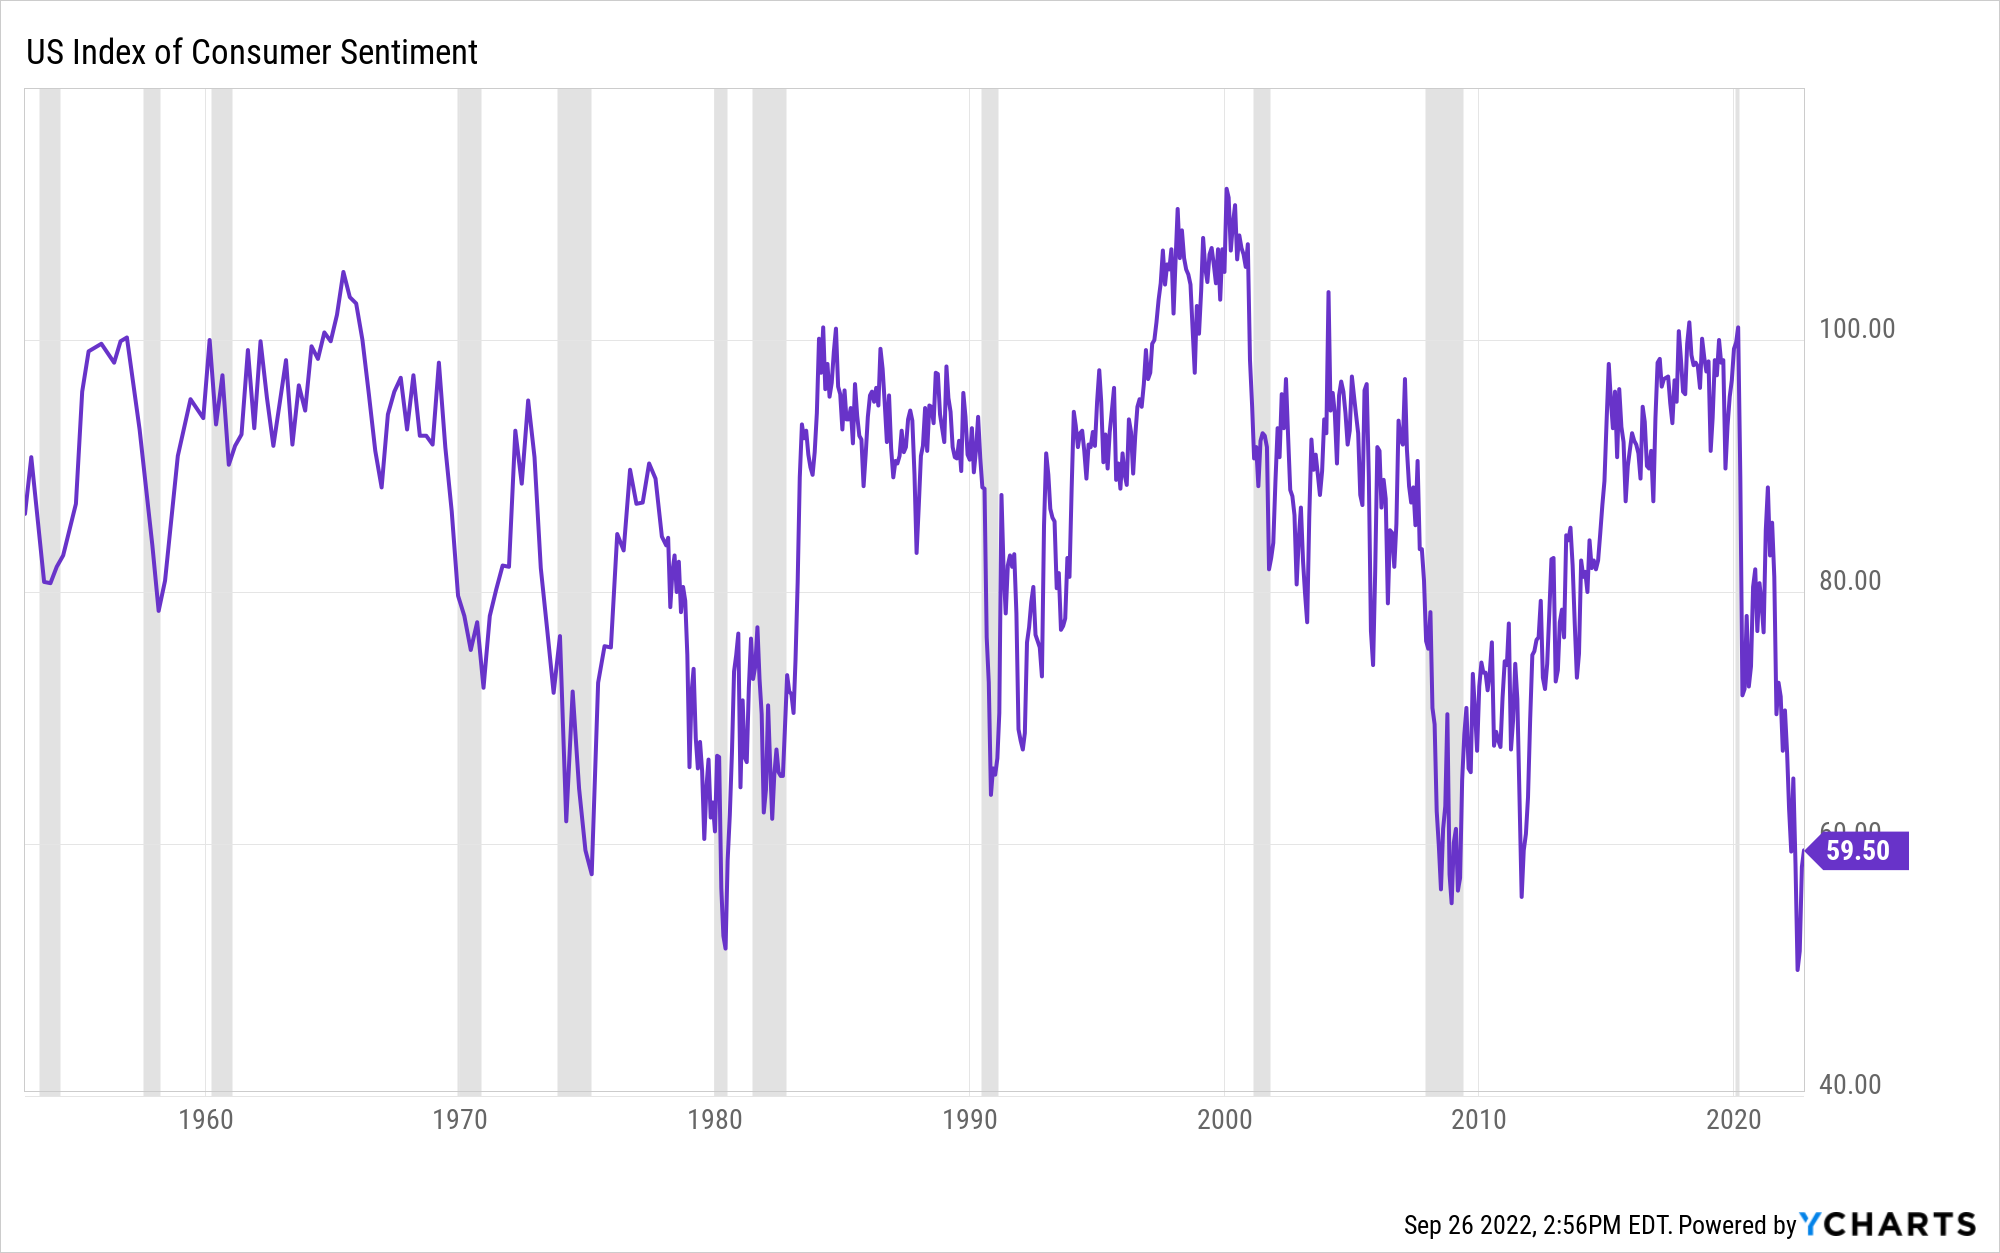 A graph depicting the change in U.S. consumer sentiment over time, with recessions highlighted in gray